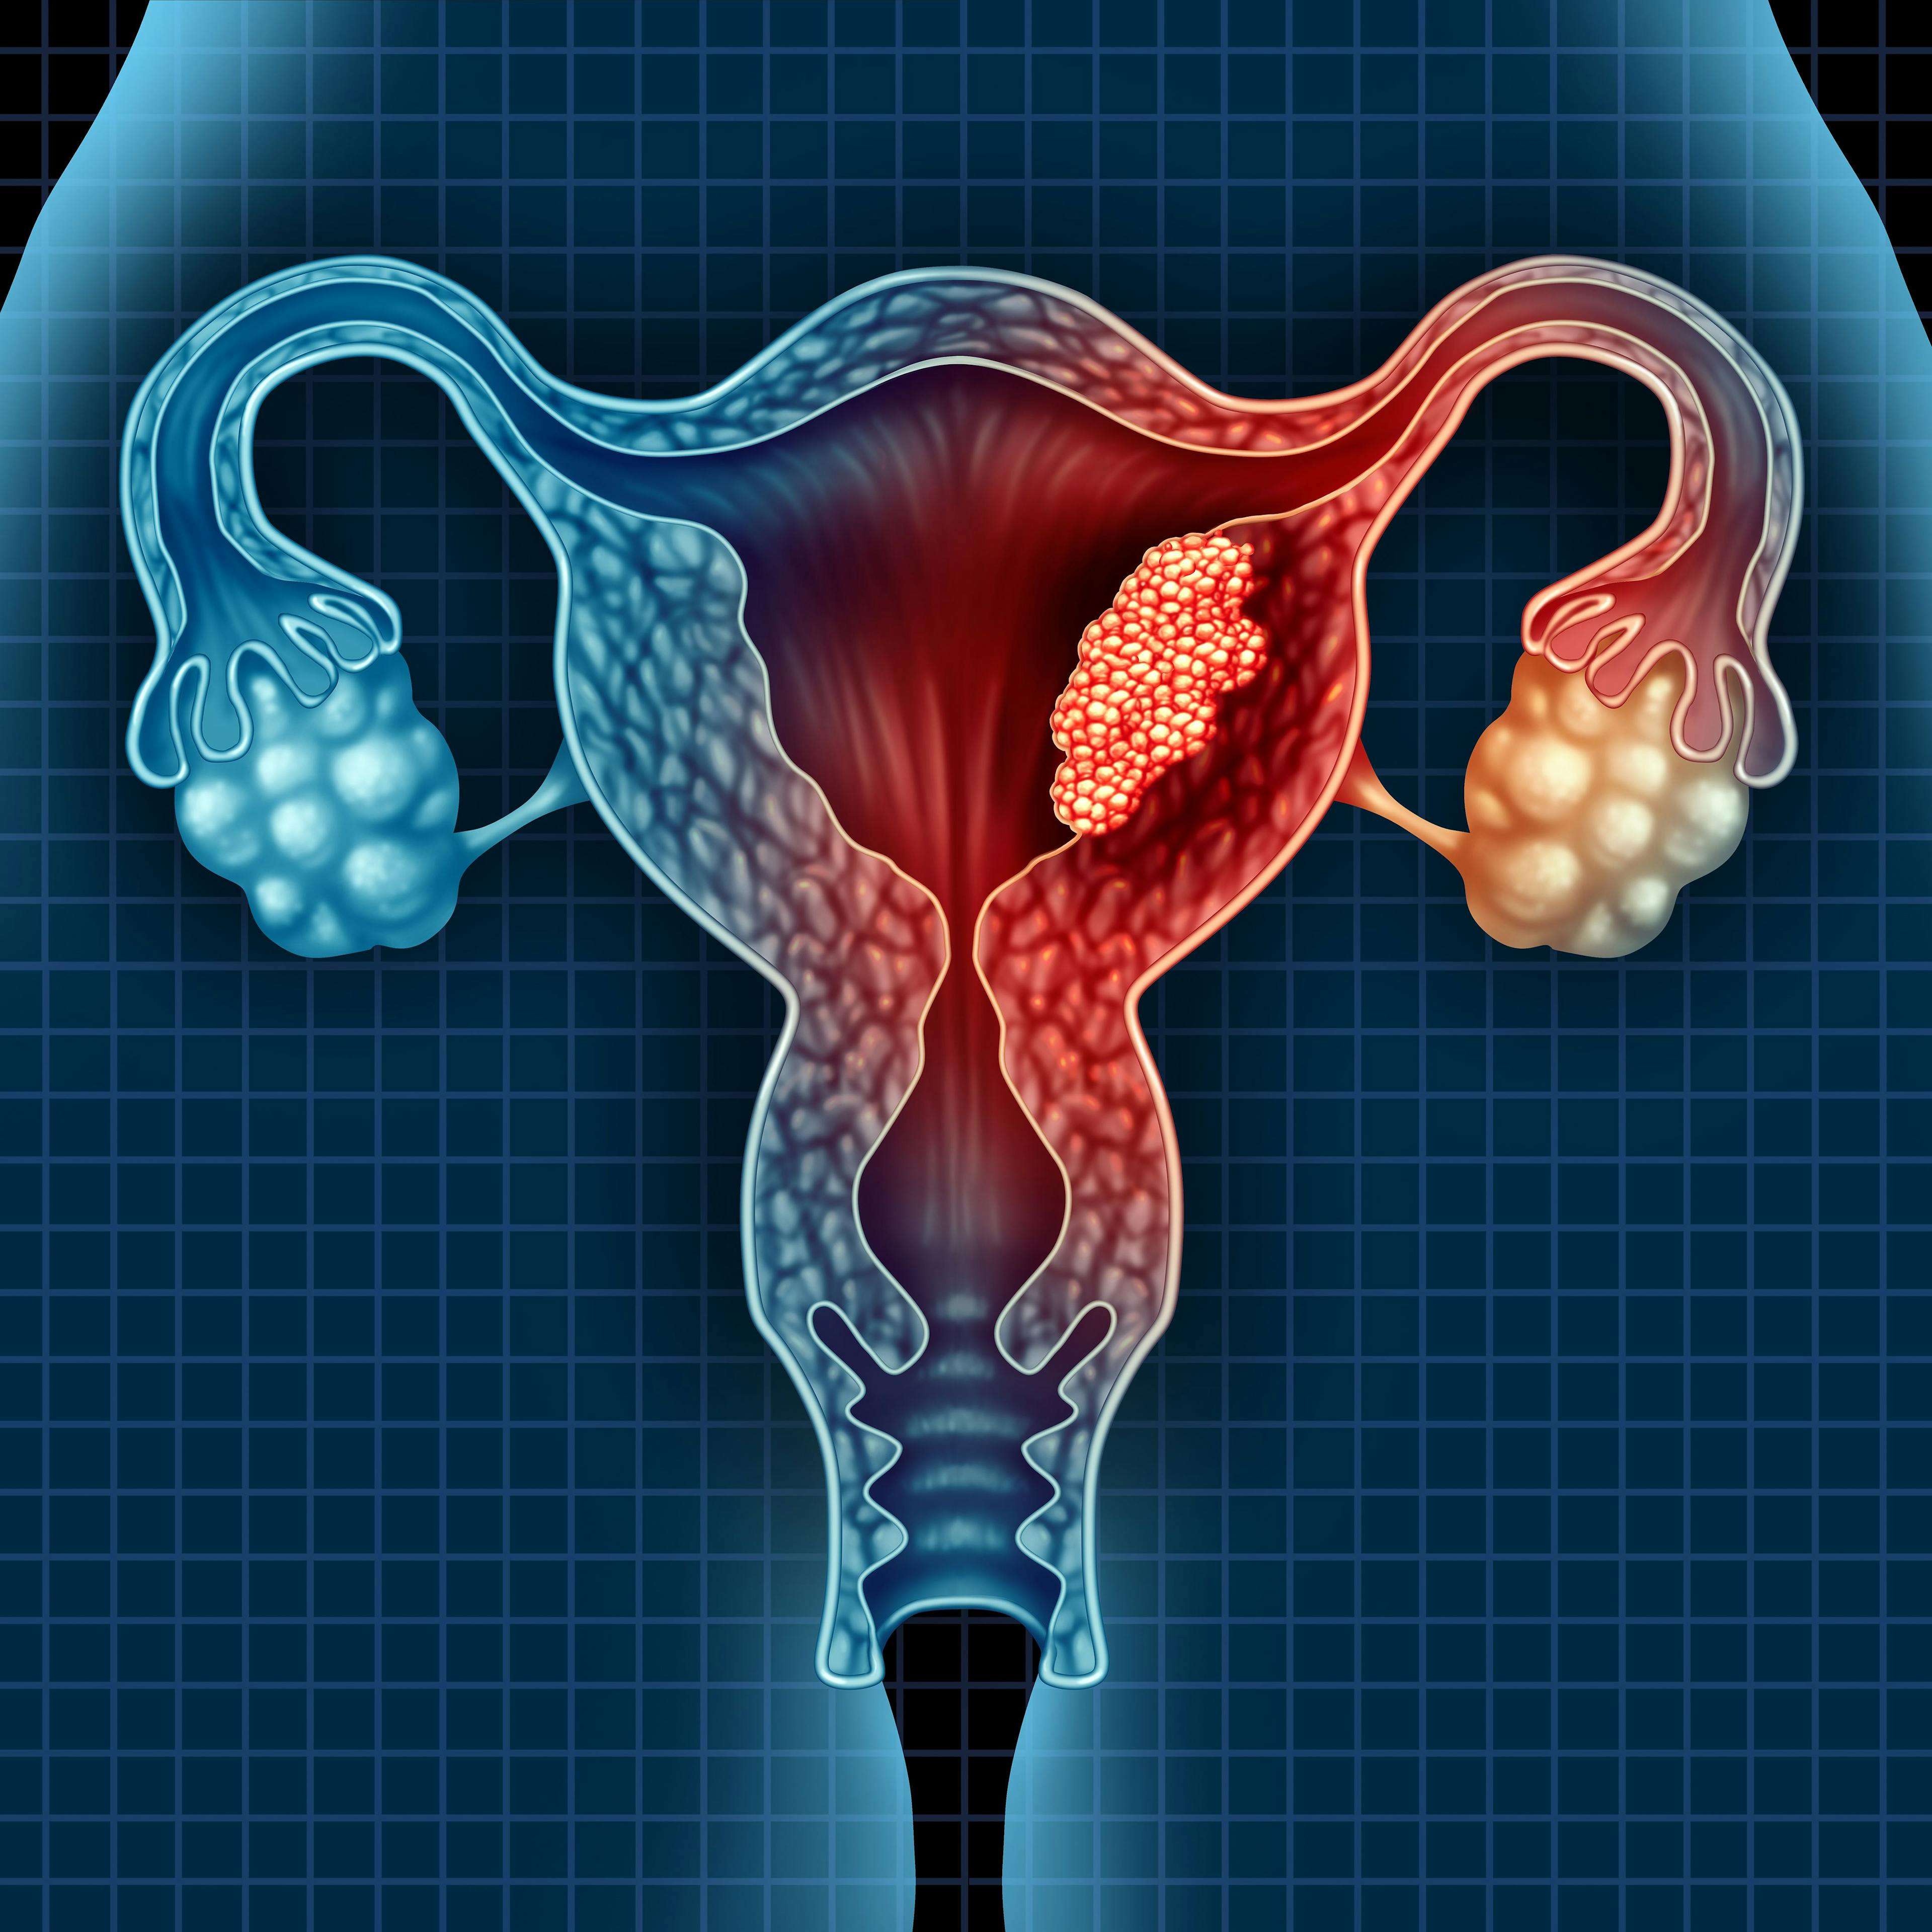 Findings from the phase 2 DOMEC trial showed that although durvalumab plus olaparib was well tolerated, it missed the study’s primary end point of progression-free survival in patients with metastatic or recurrent endometrial cancer. 